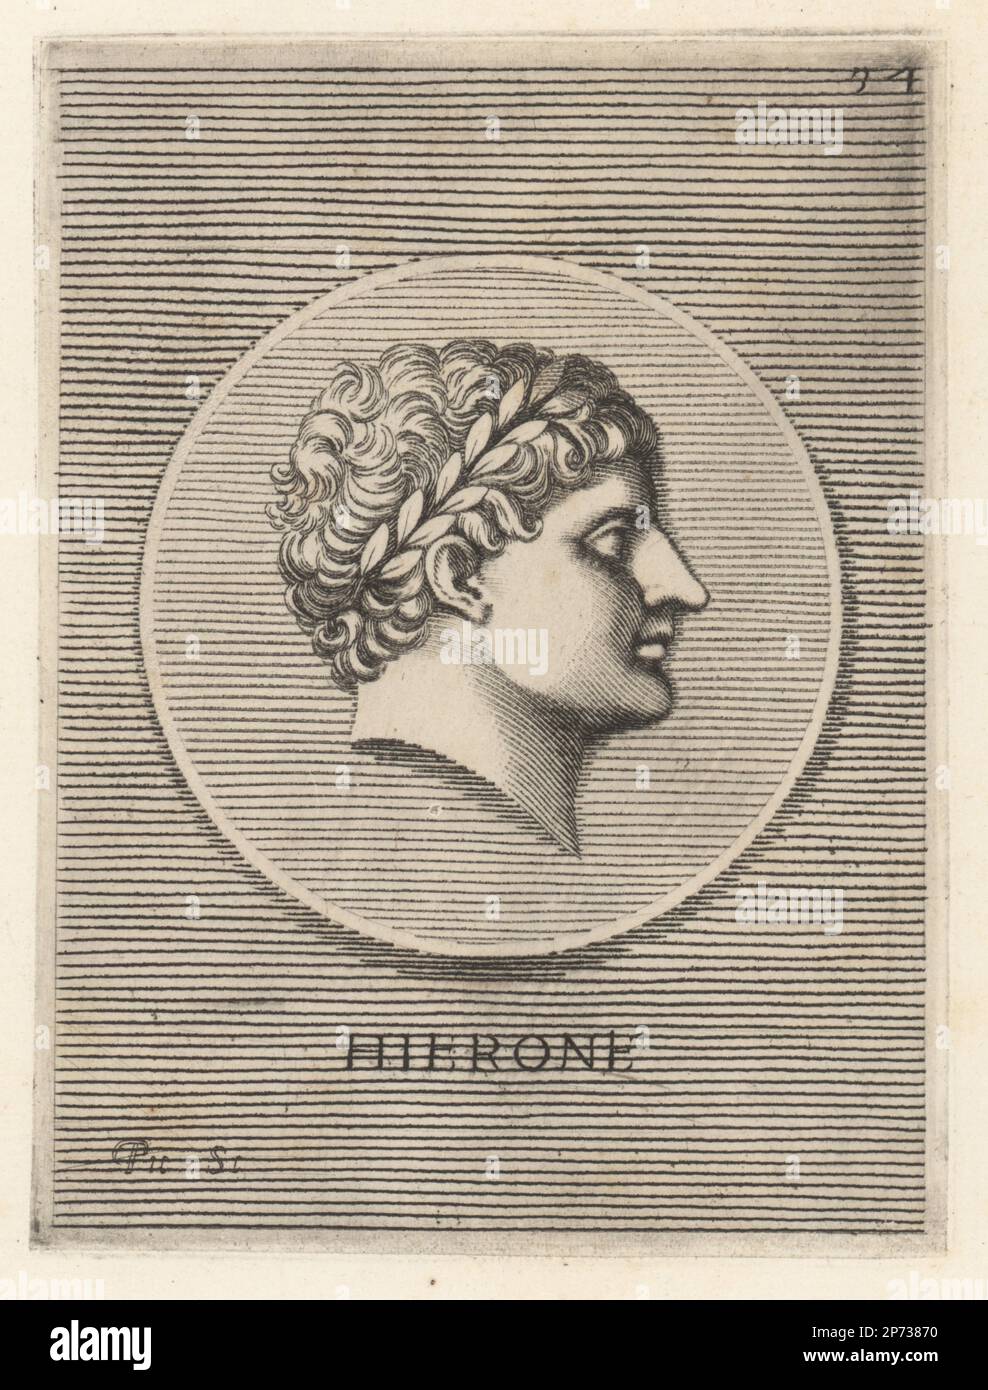 Hiero II, Greek tyrant of Syracuse, Sicily, from 275 to 215 BC. Former general of Pyrrhus of Epirus and important figure of the First Punic War. Head of a young man in laurel crown. Hierone. Copperplate engraving by Etienne Picart after Giovanni Angelo Canini from Iconografia, cioe disegni d'imagini de famosissimi monarchi, regi, filososi, poeti ed oratori dell' Antichita, Drawings of images of famous monarchs, kings, philosophers, poets and orators of Antiquity, Ignatio de’Lazari, Rome, 1699. Stock Photo